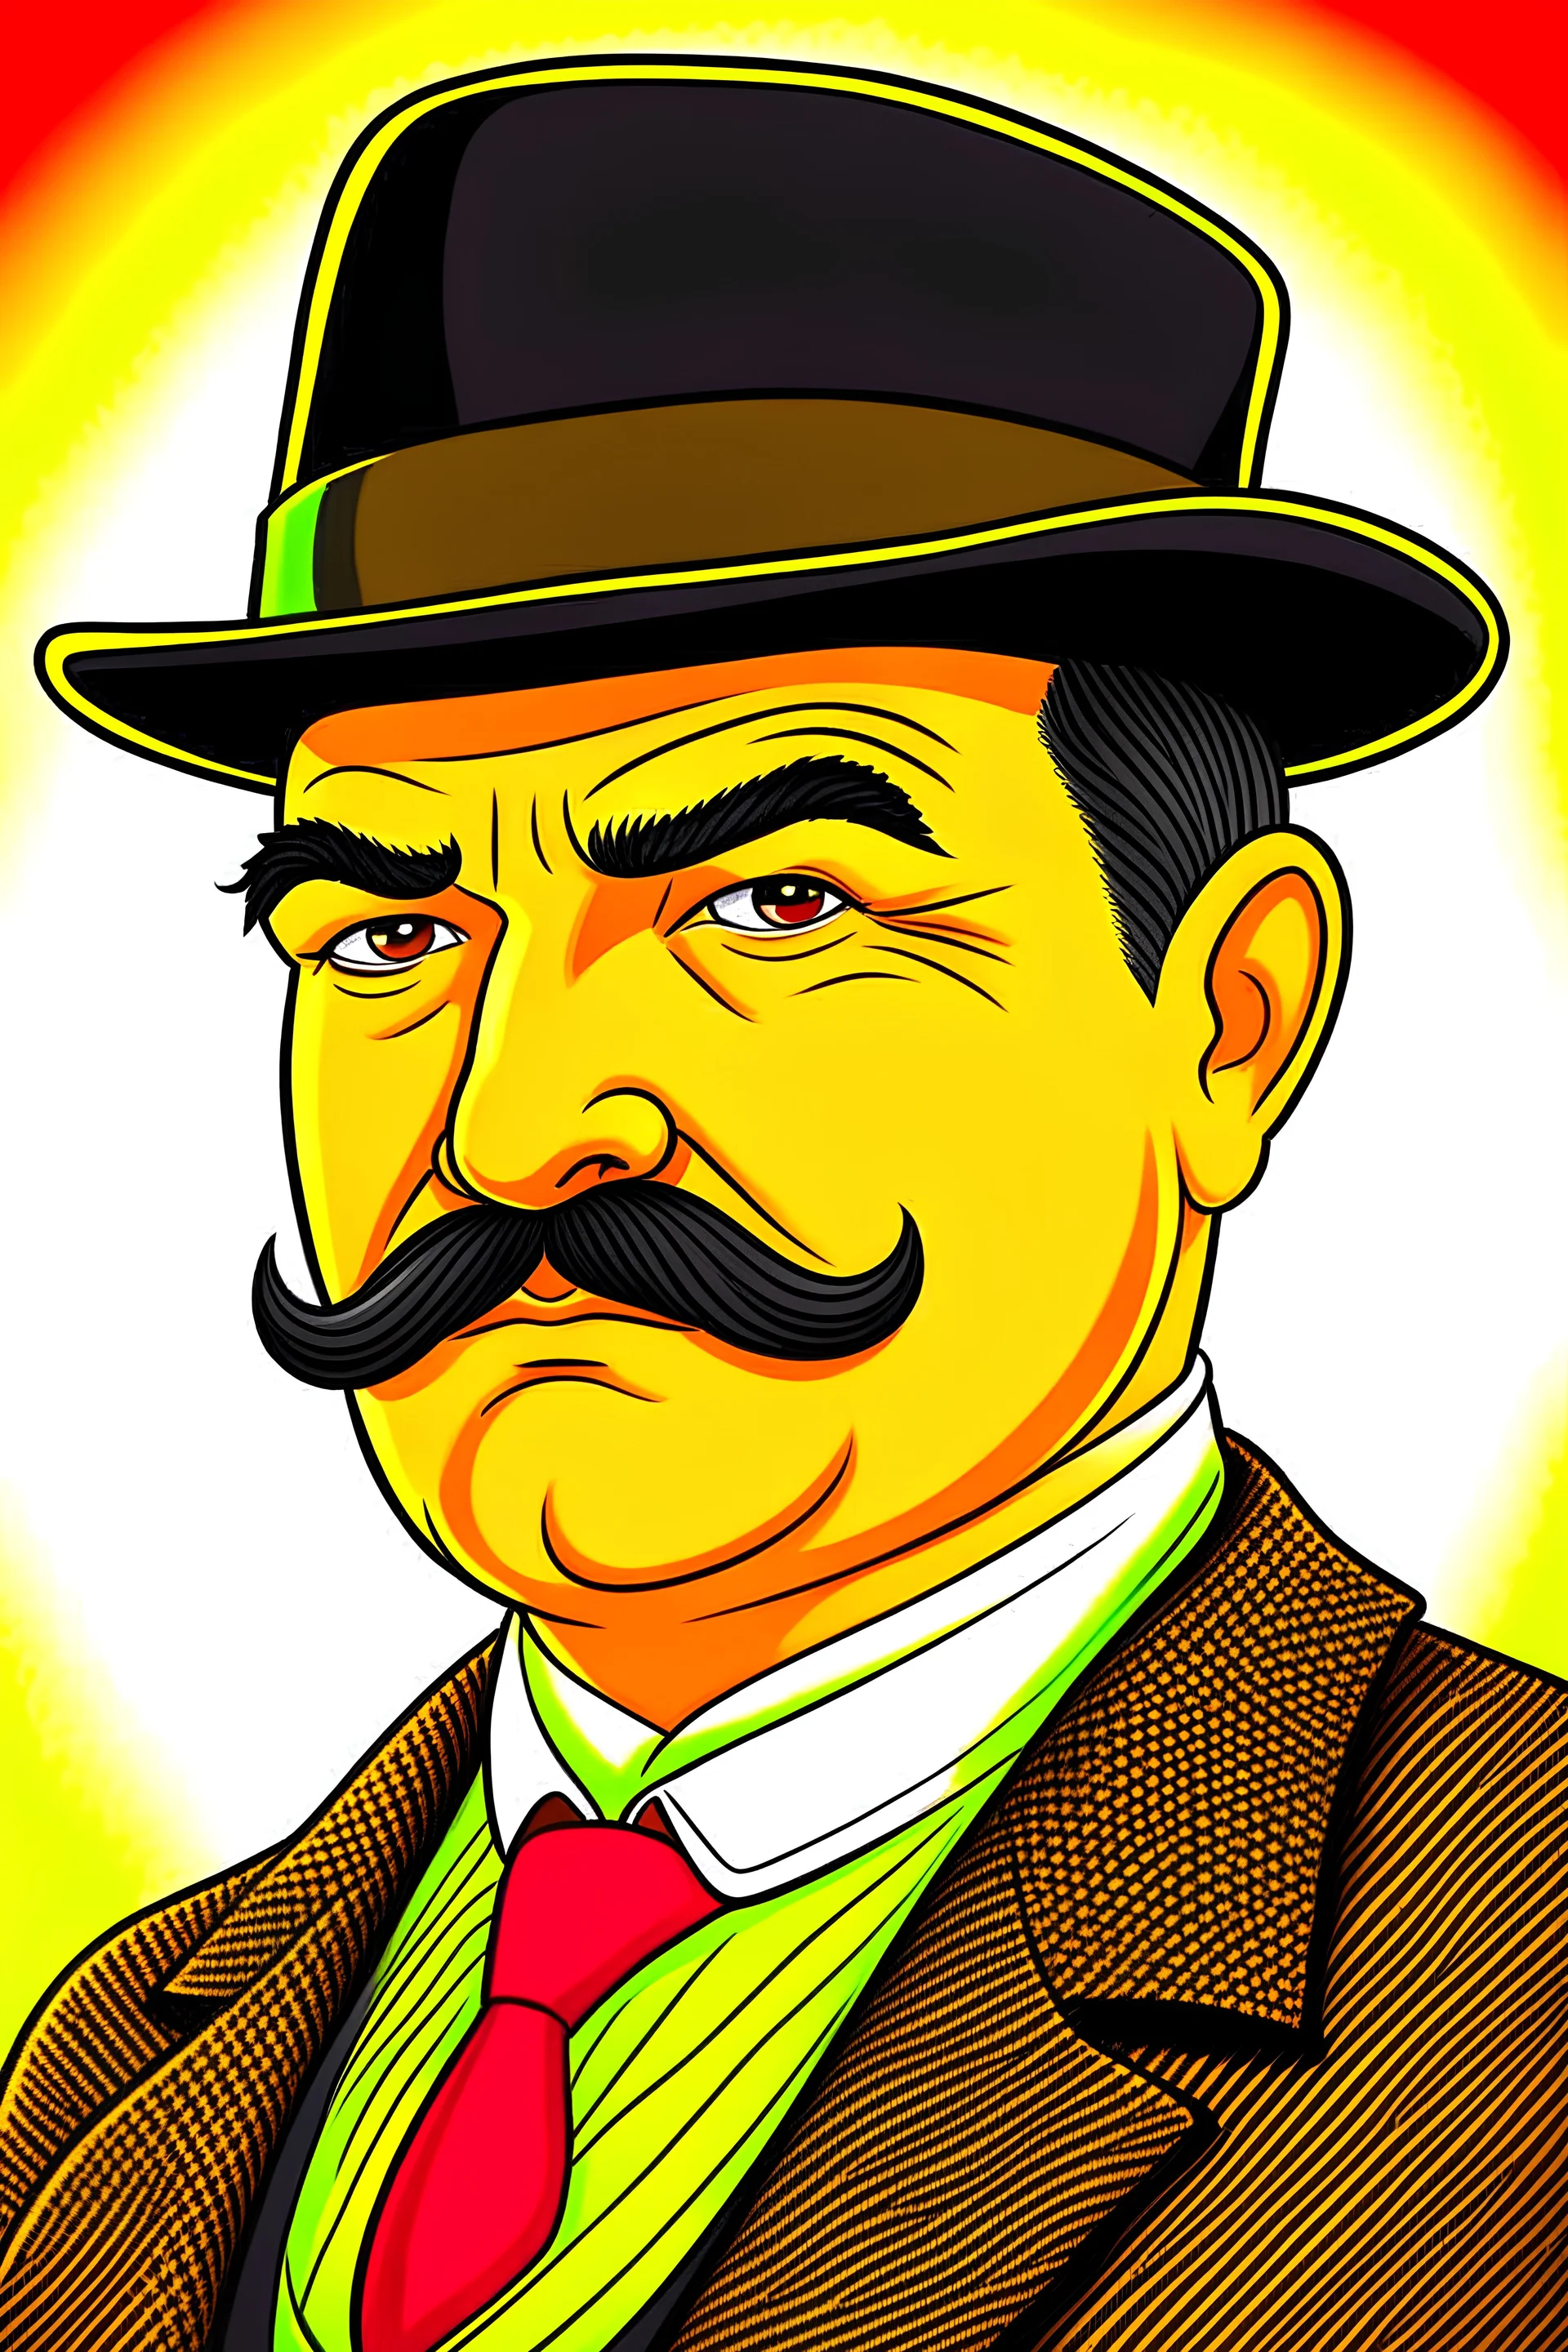 Draw the character of Hercule Poirot